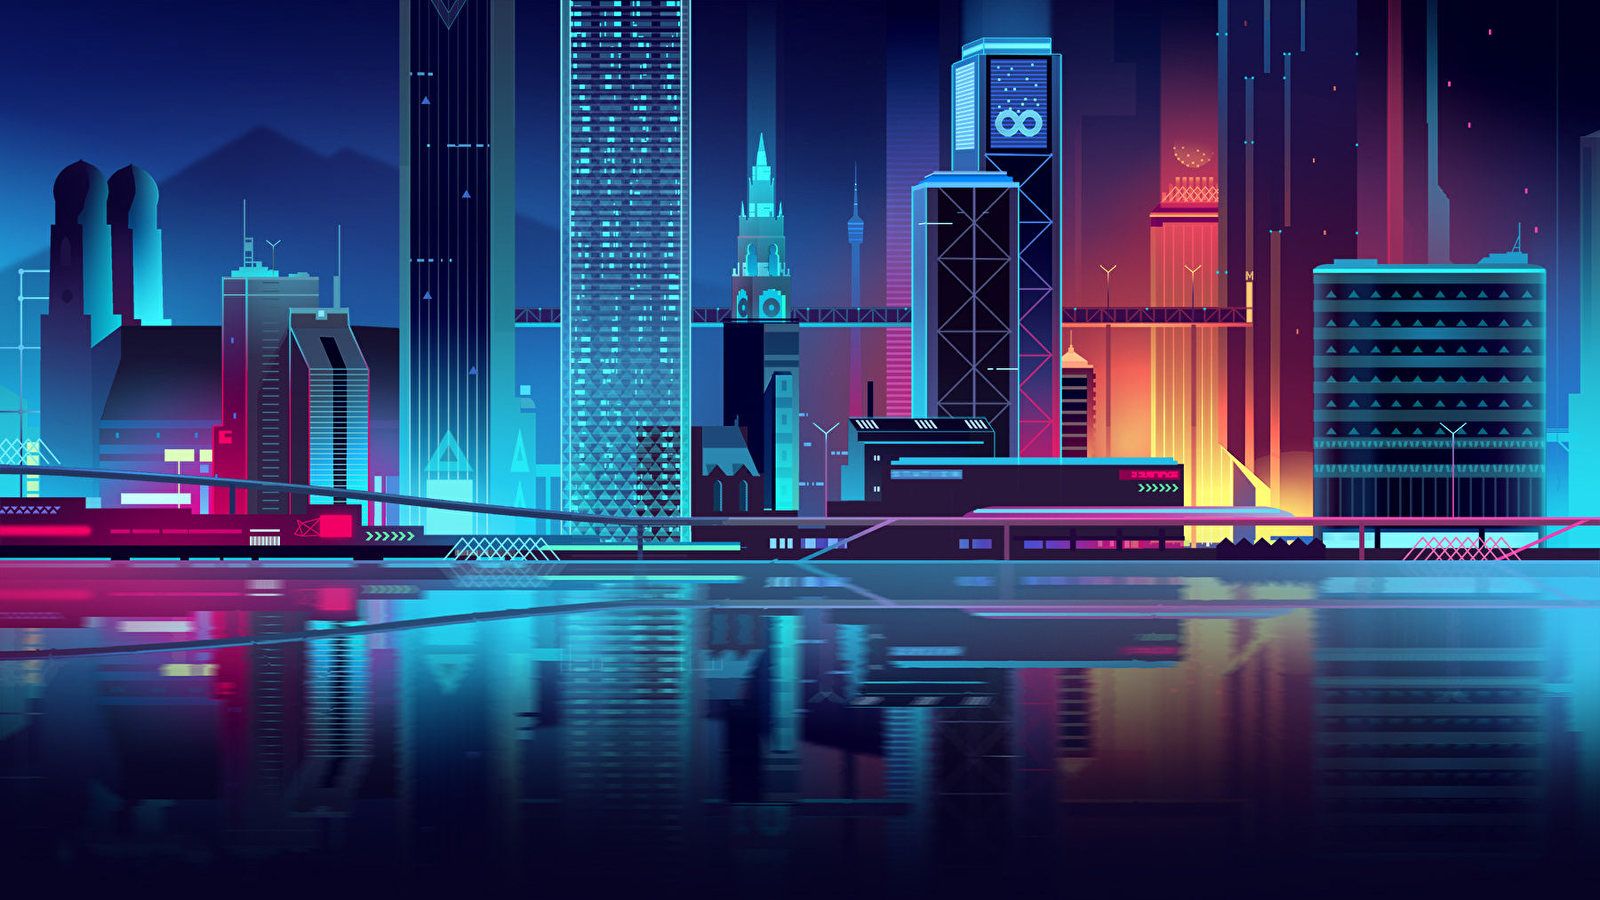 Minimalist Cities by Romain Trystram (zip in comments) 1920x1080